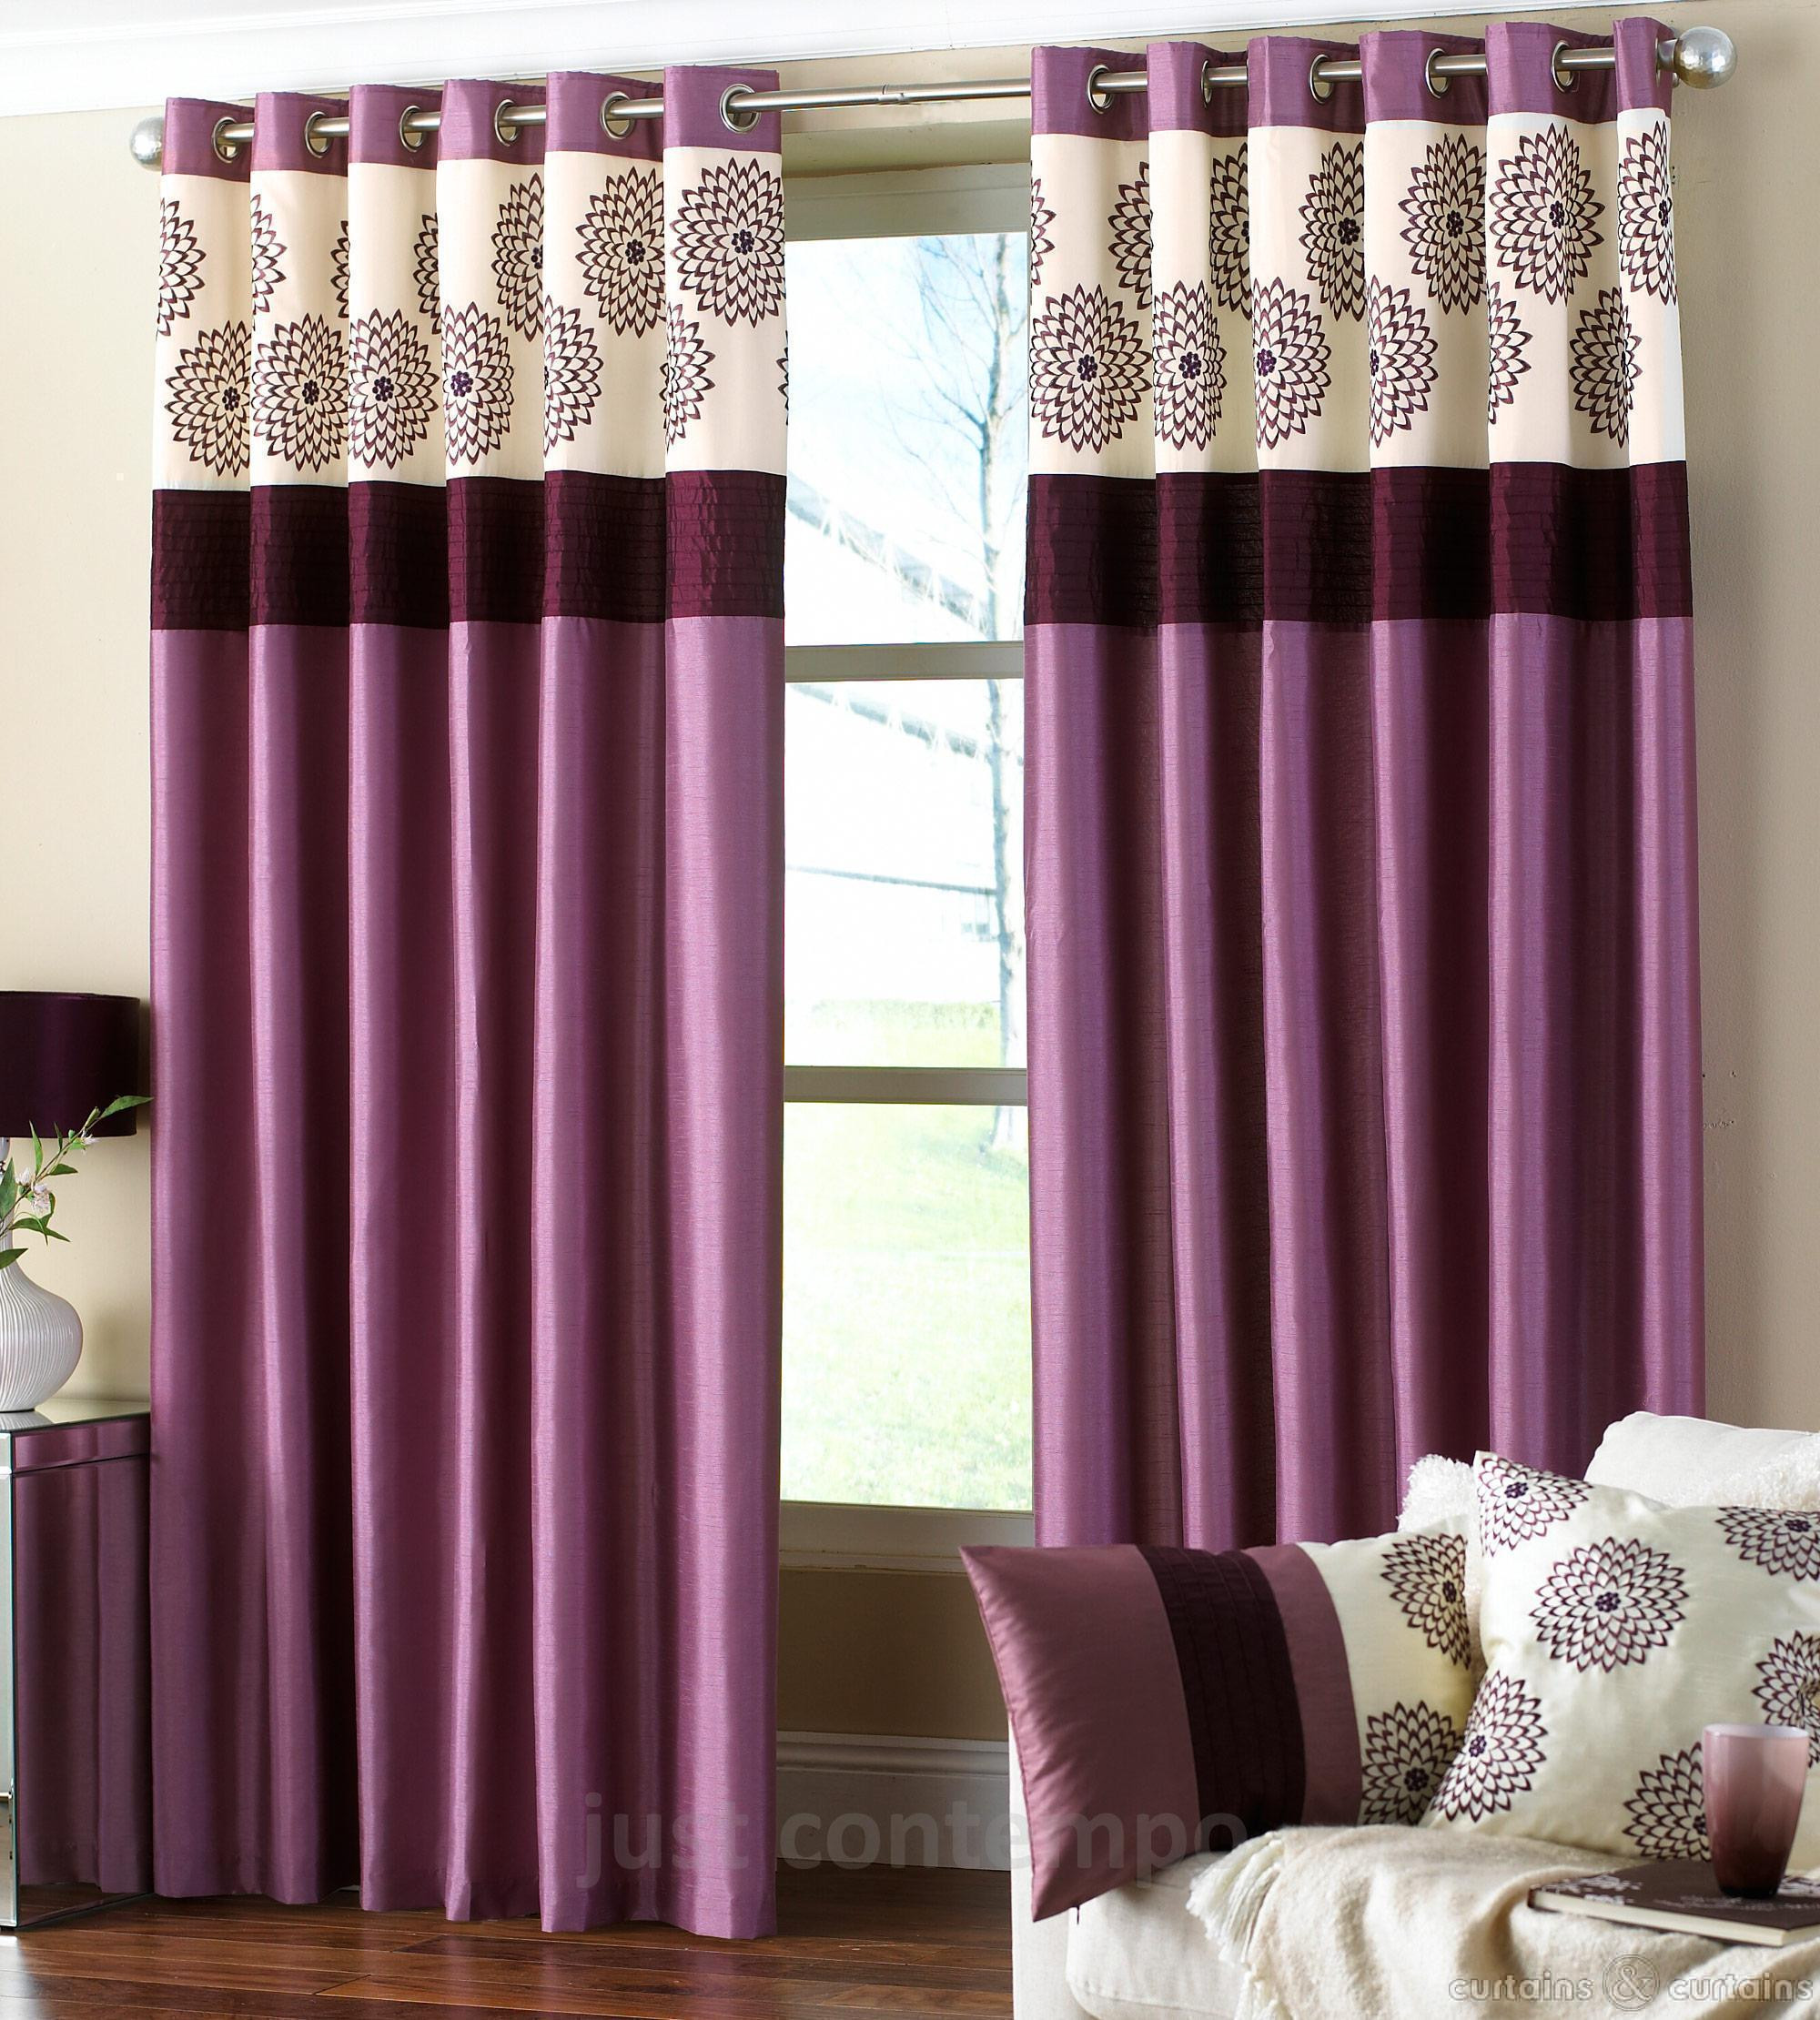 Living Room Curtain Designs
 Choosing Curtain Designs Think of These 4 Aspects